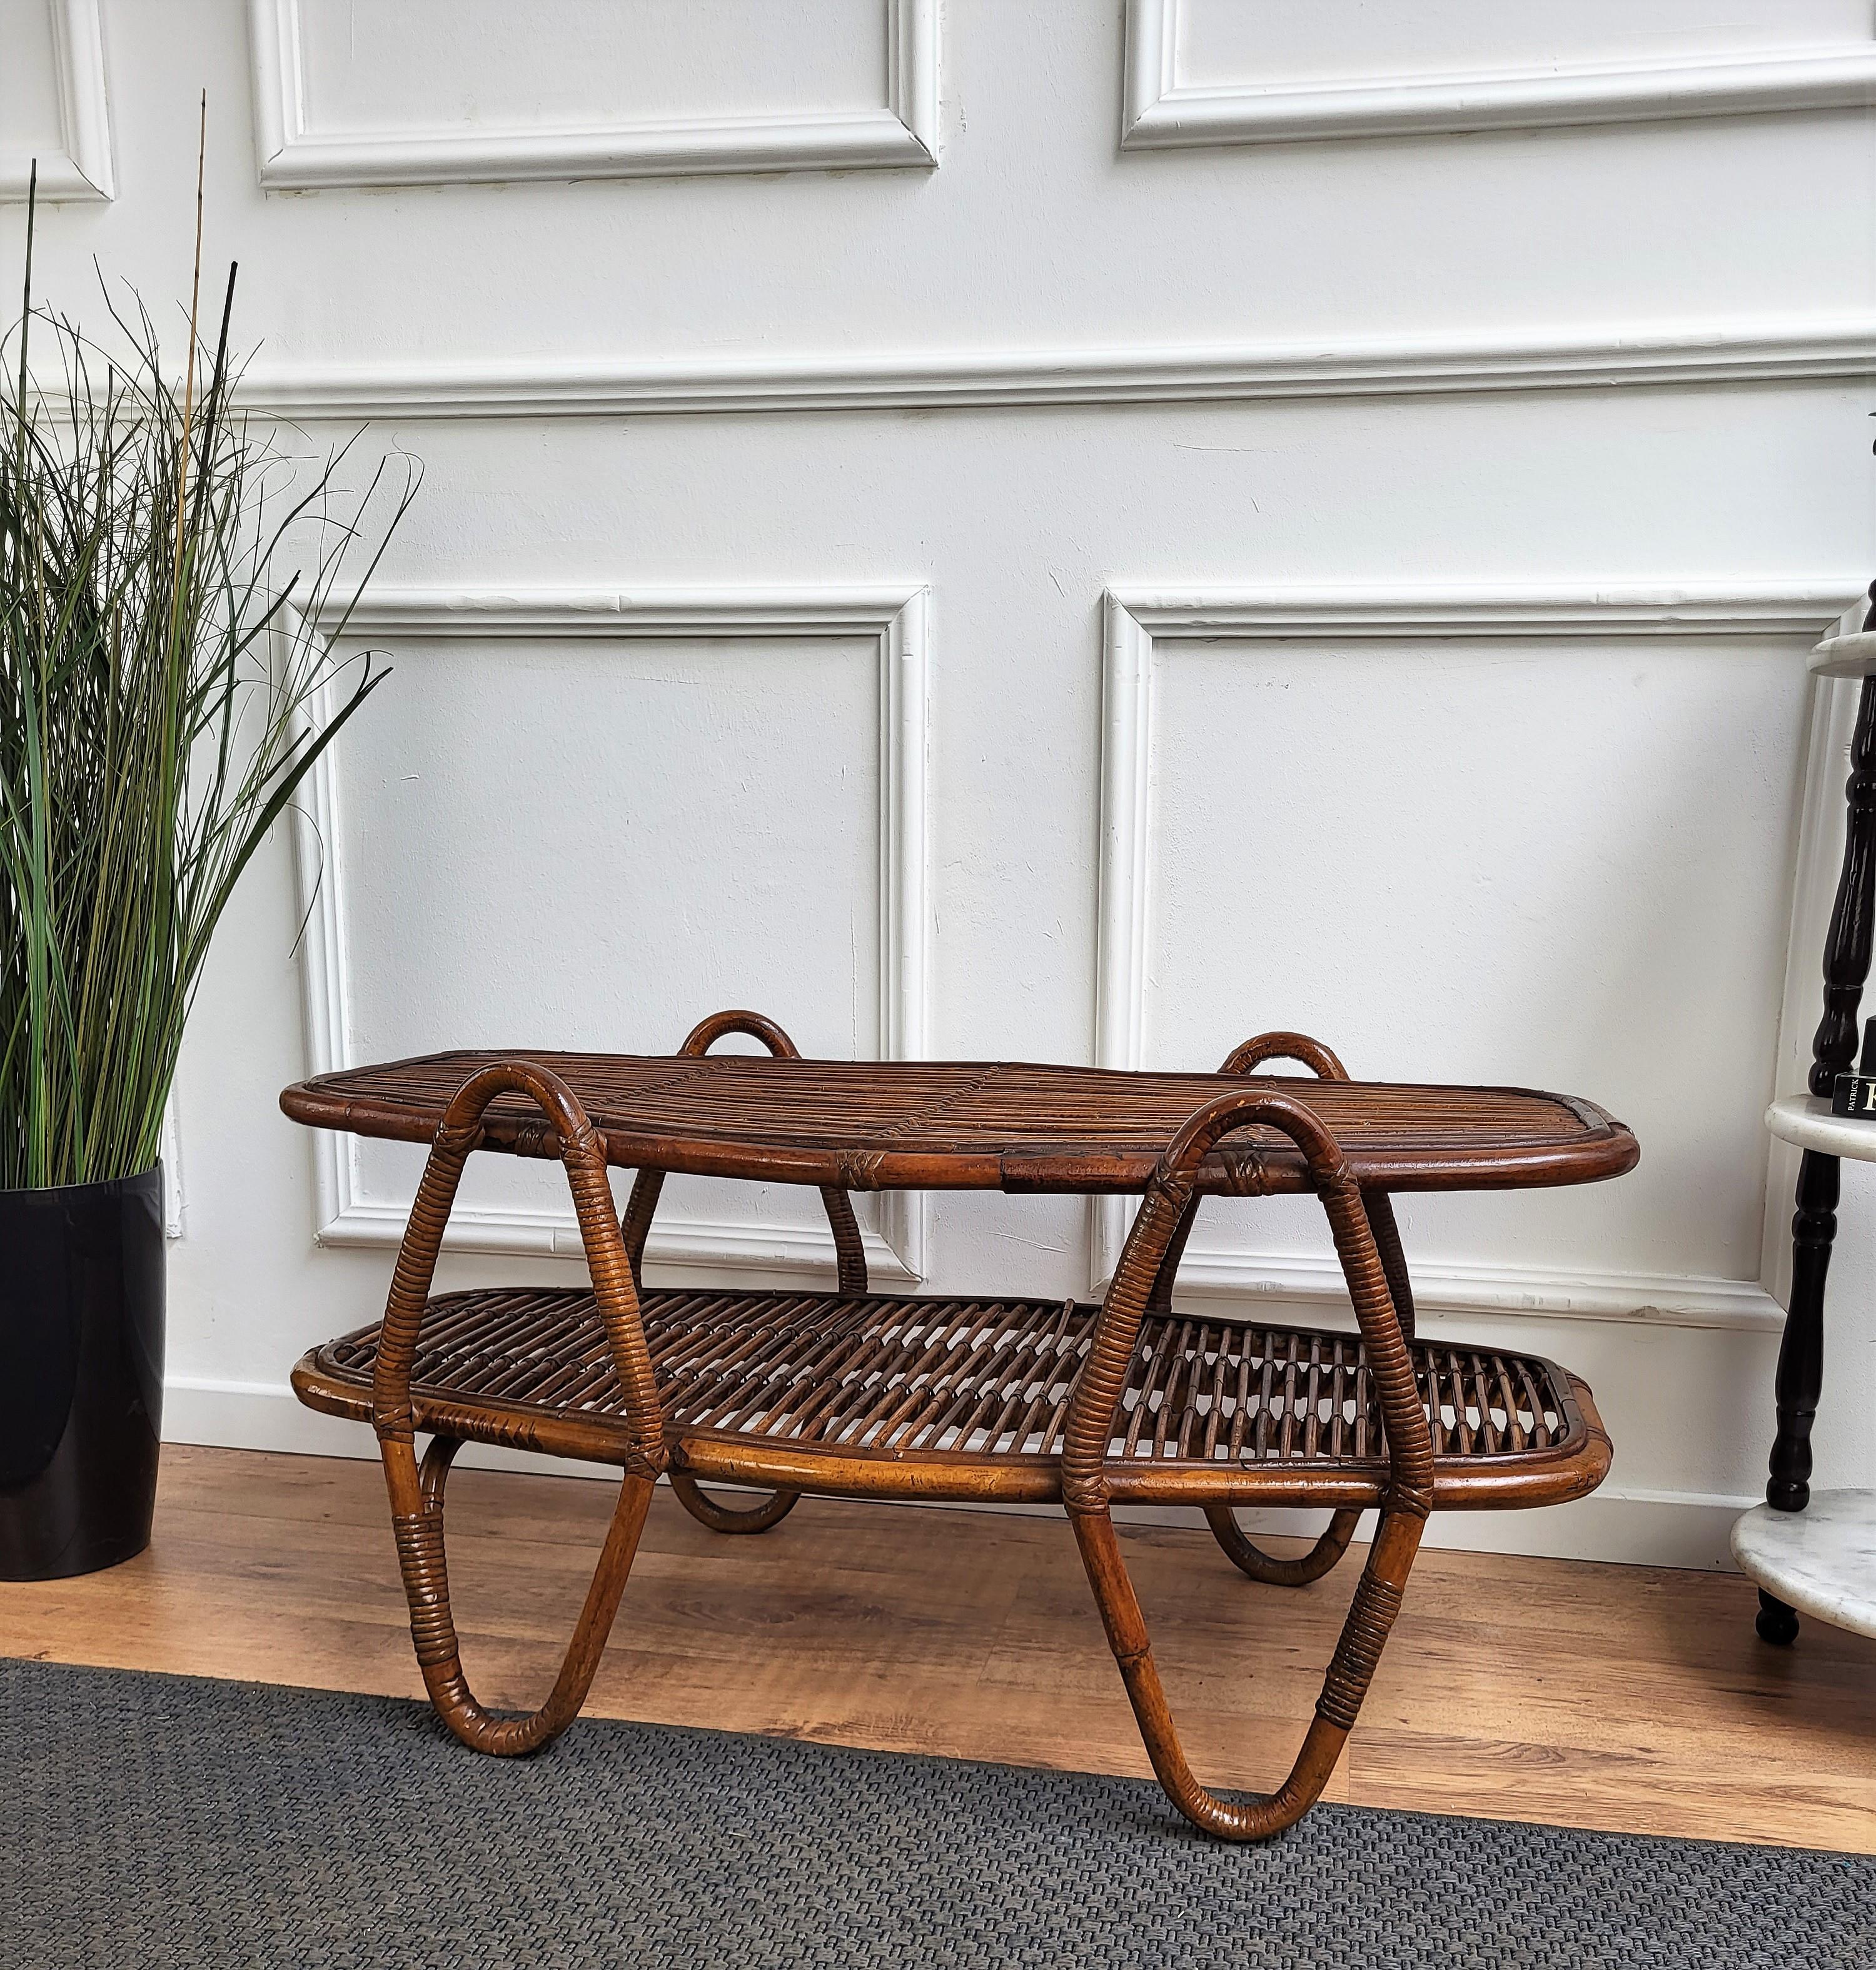 Beautiful 1960s Italian Mid-Century Modern oval accent and coffee table, perfect in any room as well as next to a sofa or in any bathroom. This charming piece is in the typical style of Dirk van Sliedrecht and Audoux and Minet where the organic